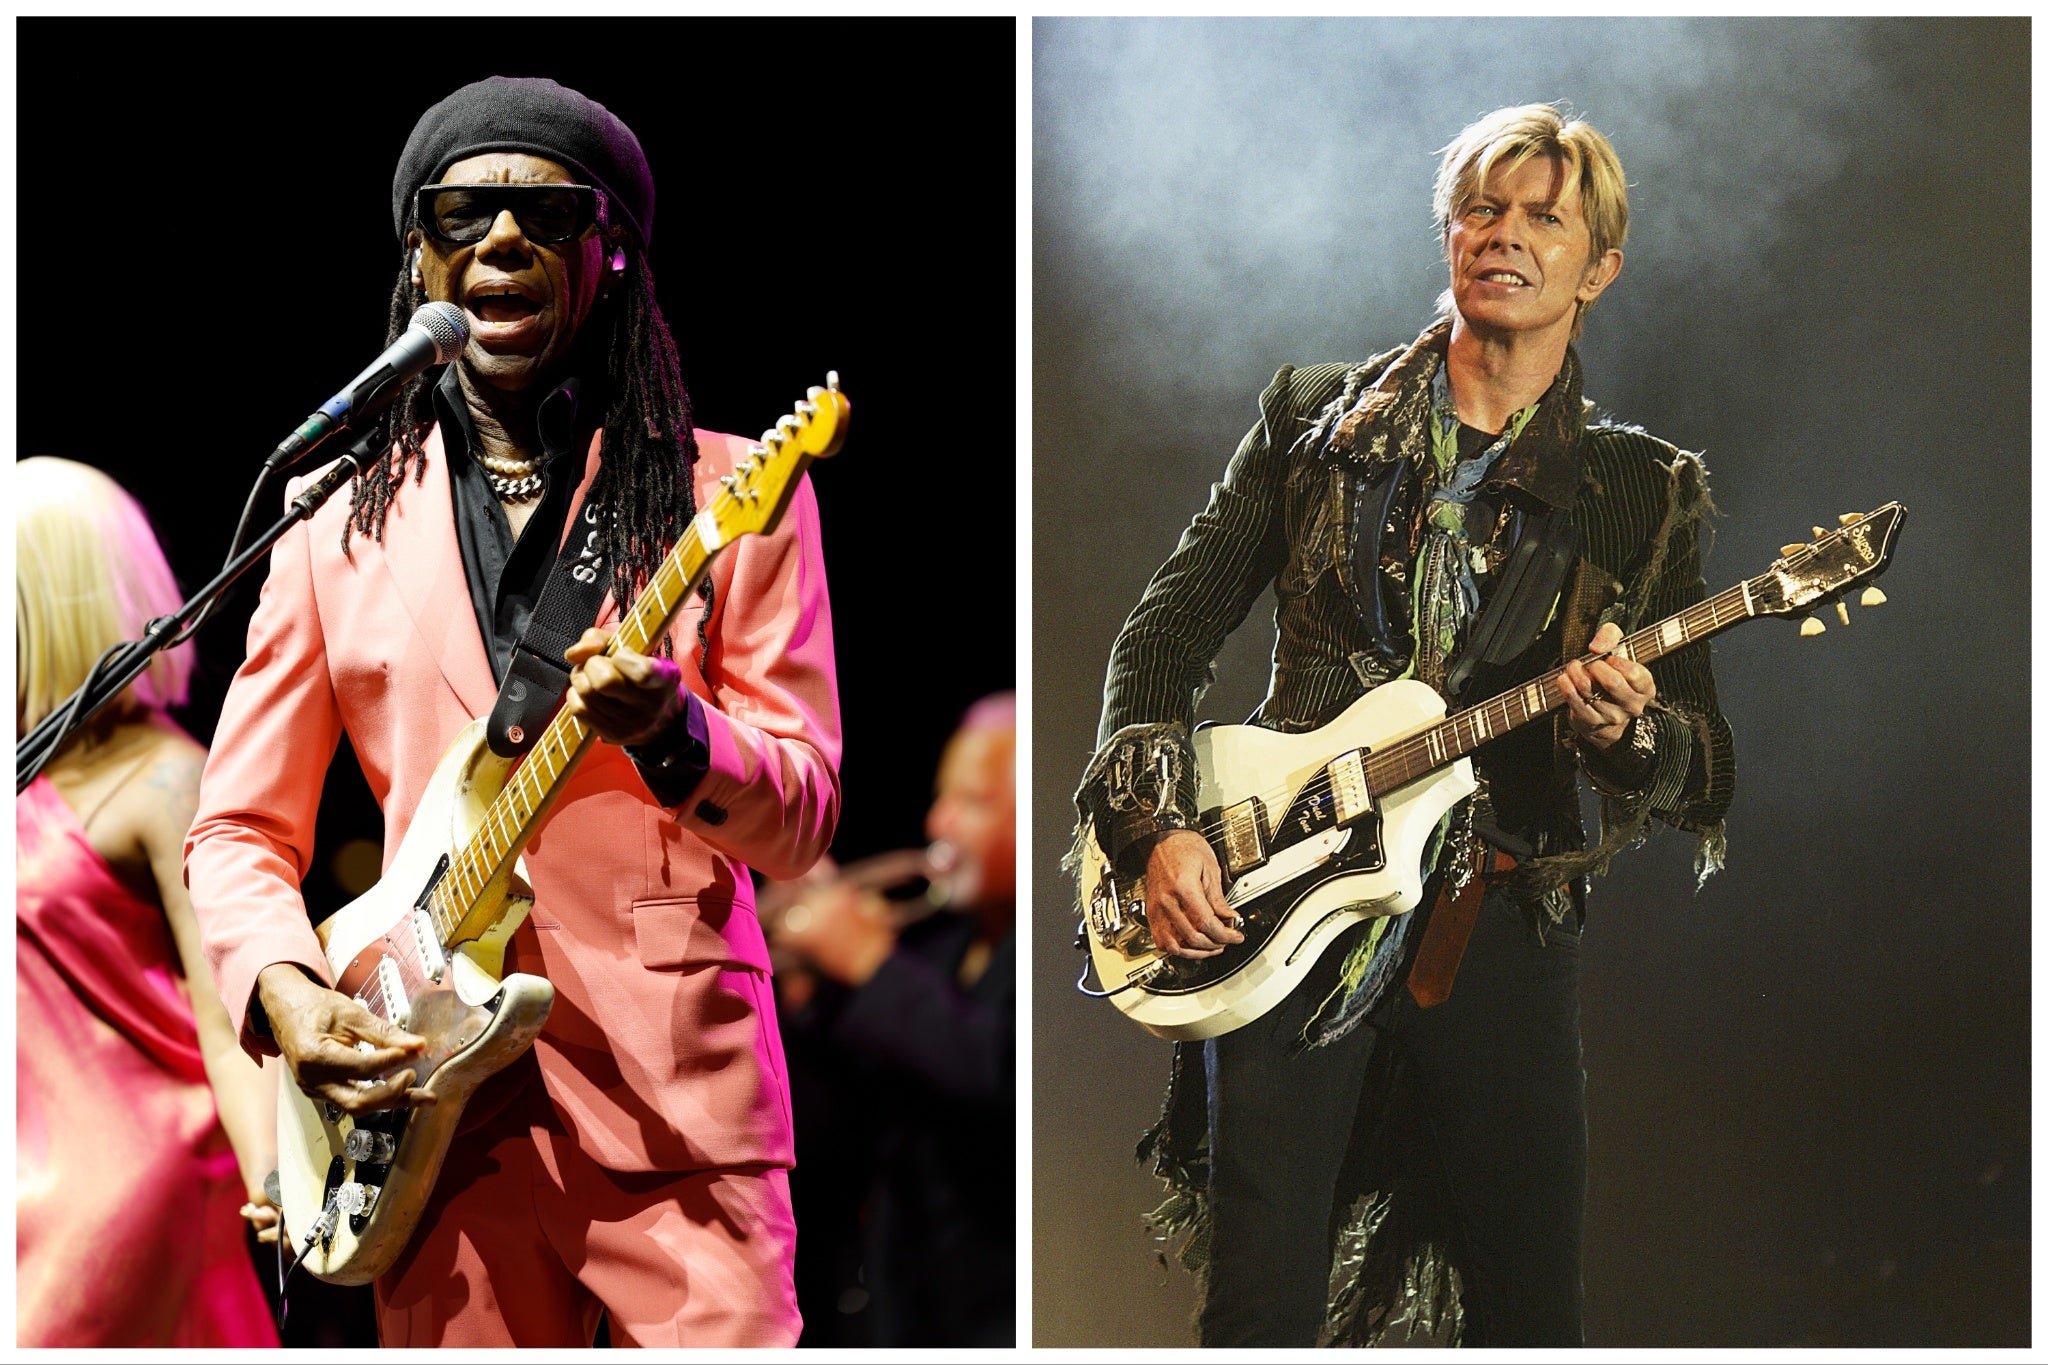 Nile Rodgers and David Bowie